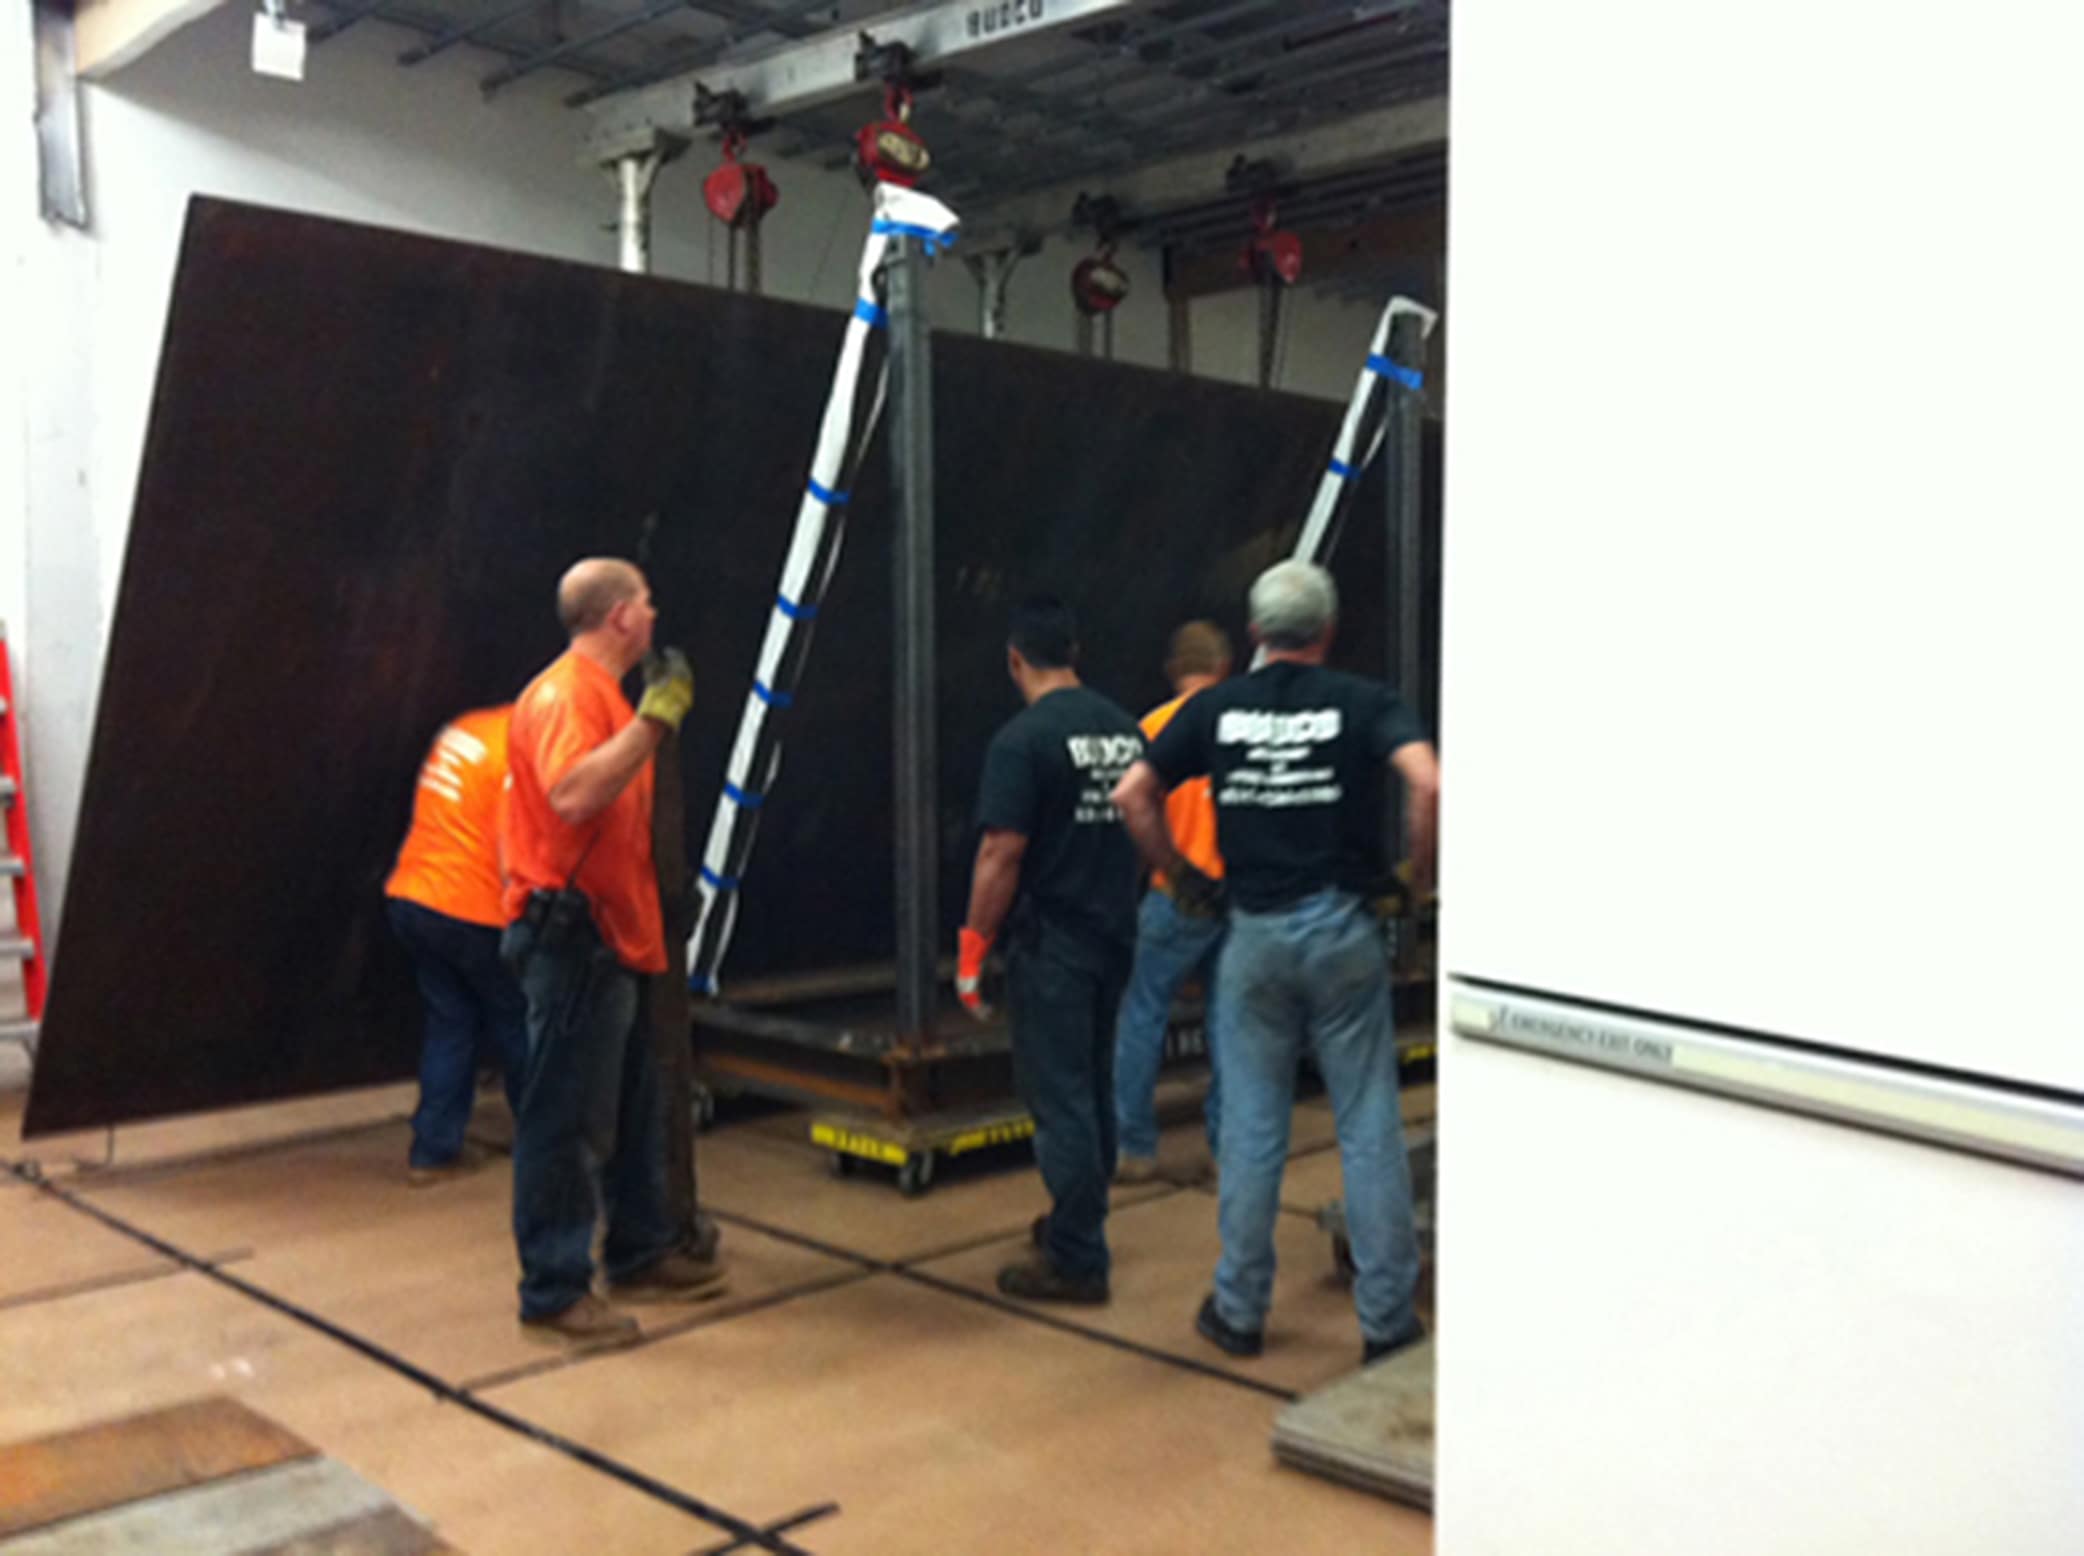 Richard Serra's Delineator Propped Up Ready to Move